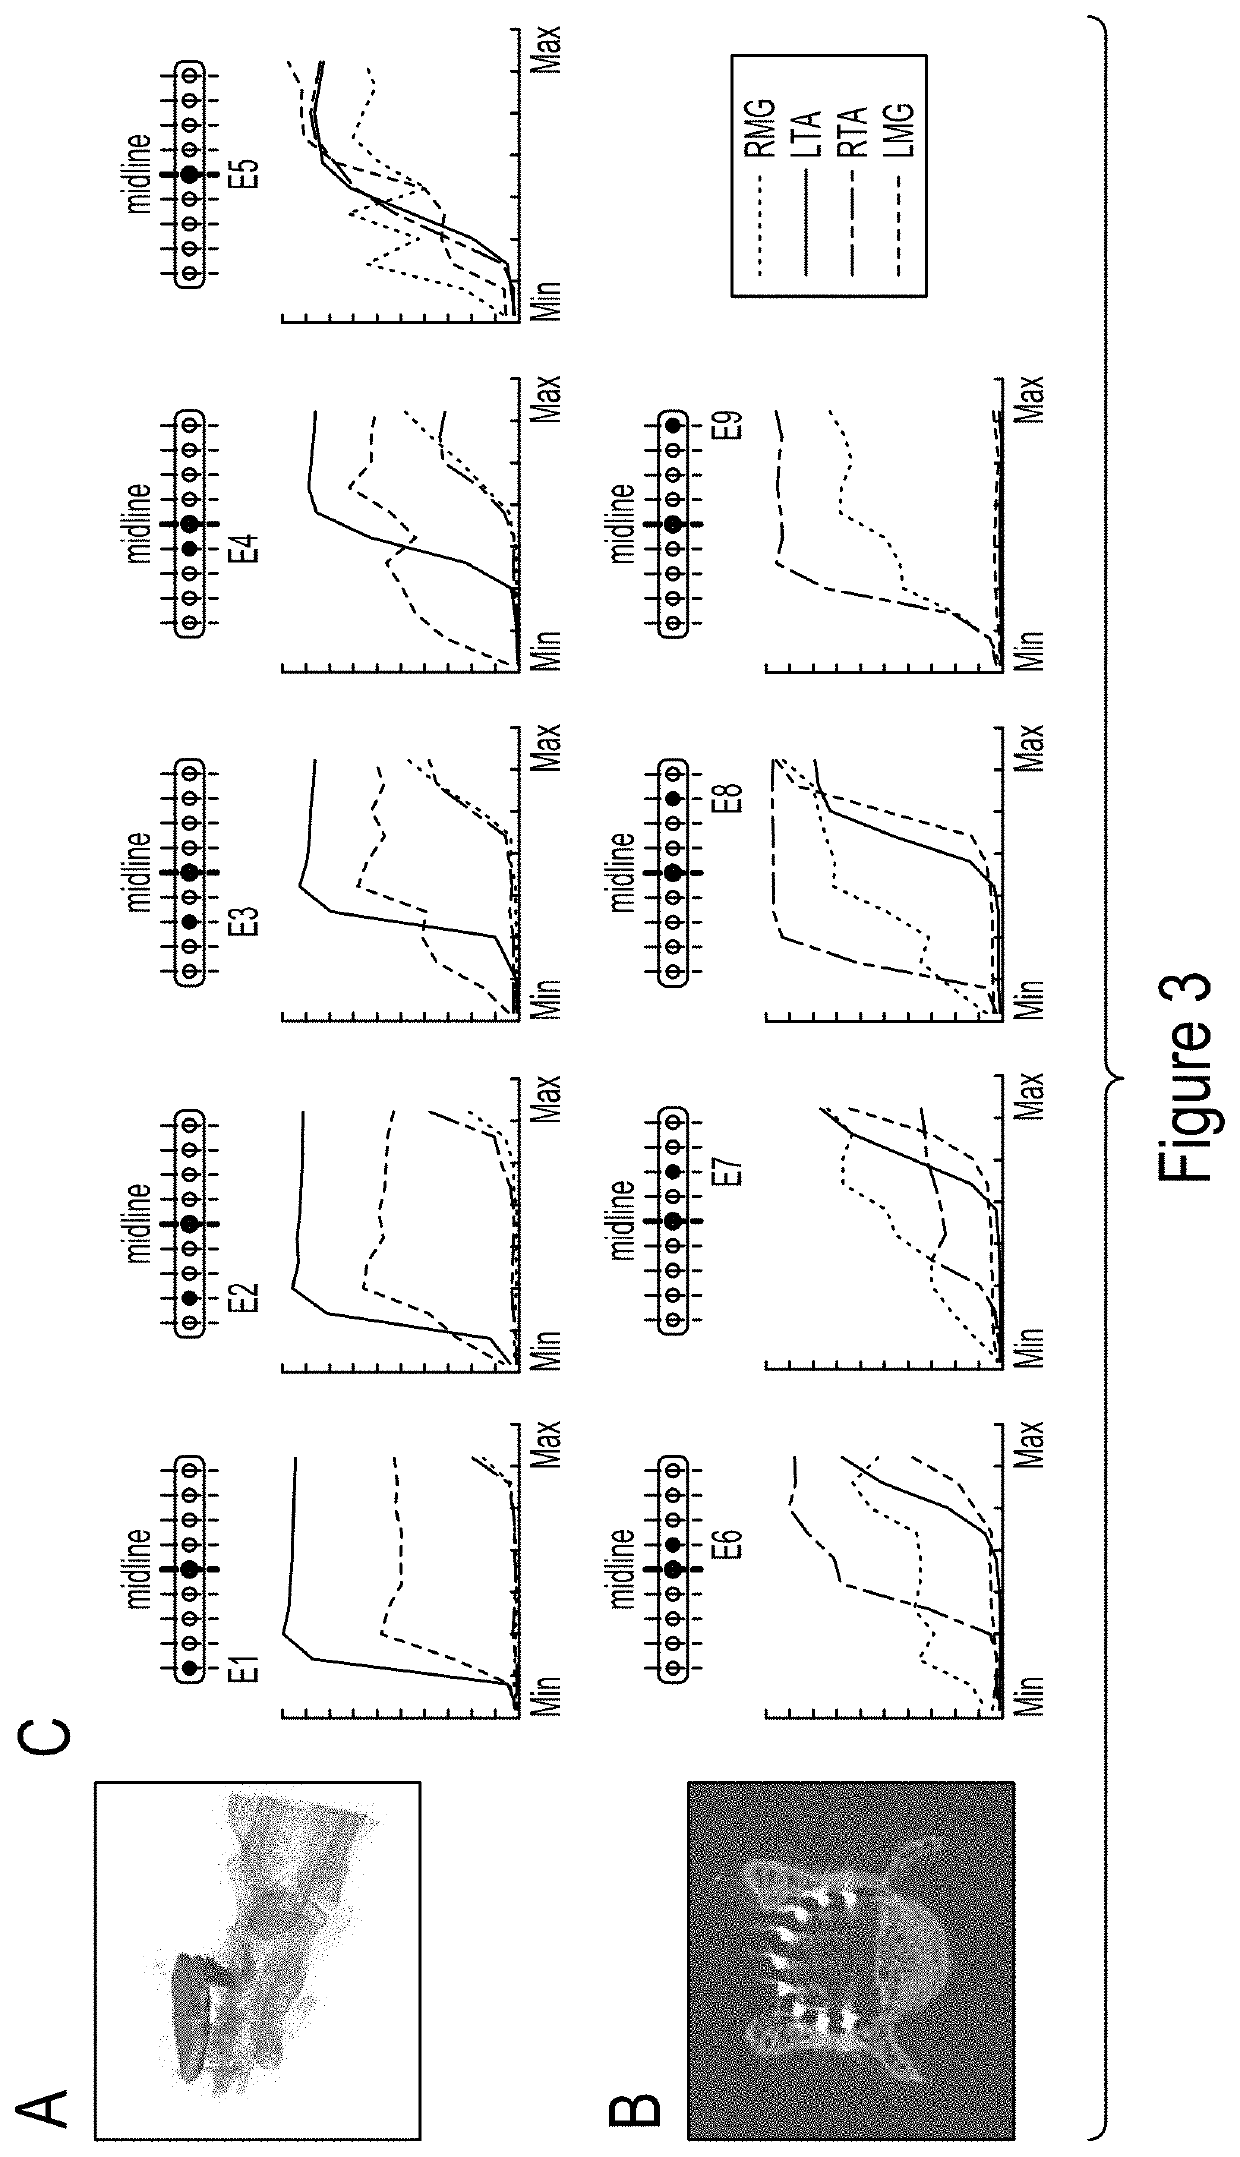 System for selective spatiotemporal stimulation of the spinal cord